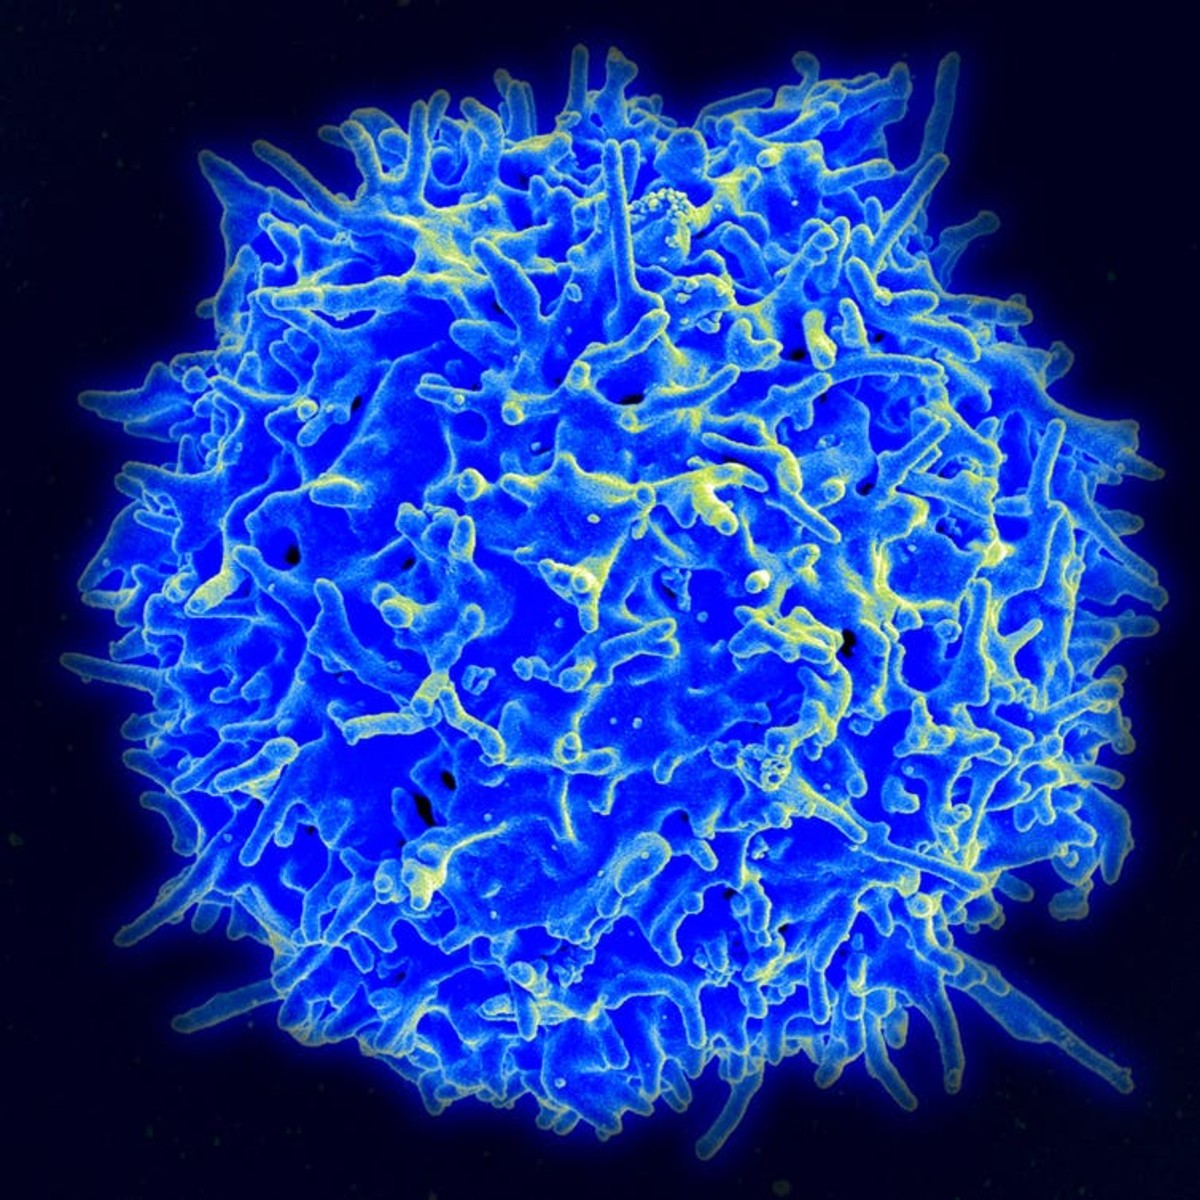 COVID–19 vaccines produce a strong immune response in terms of both antibodies and T cells, like the T cell in this photo. National Institutes of Allergy and Infectious Diseases/National Institutes of Health